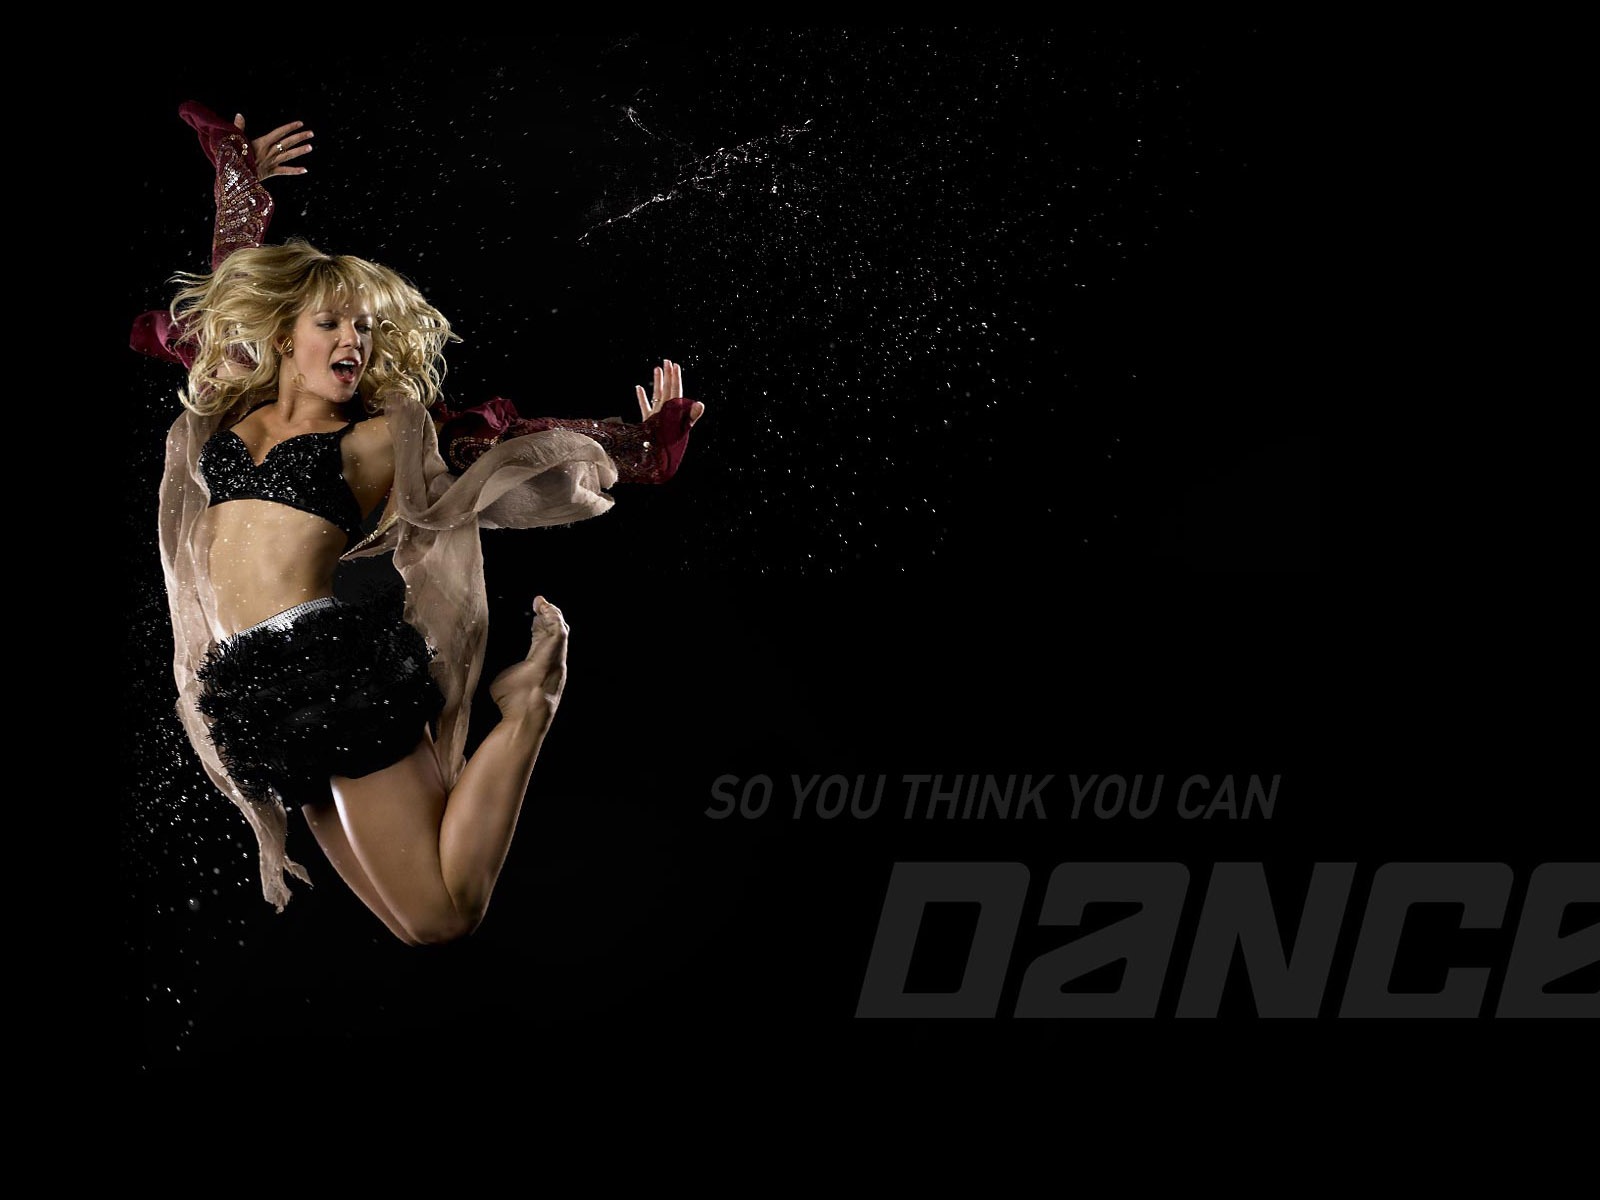 So You Think You Can Dance wallpaper (1) #7 - 1600x1200